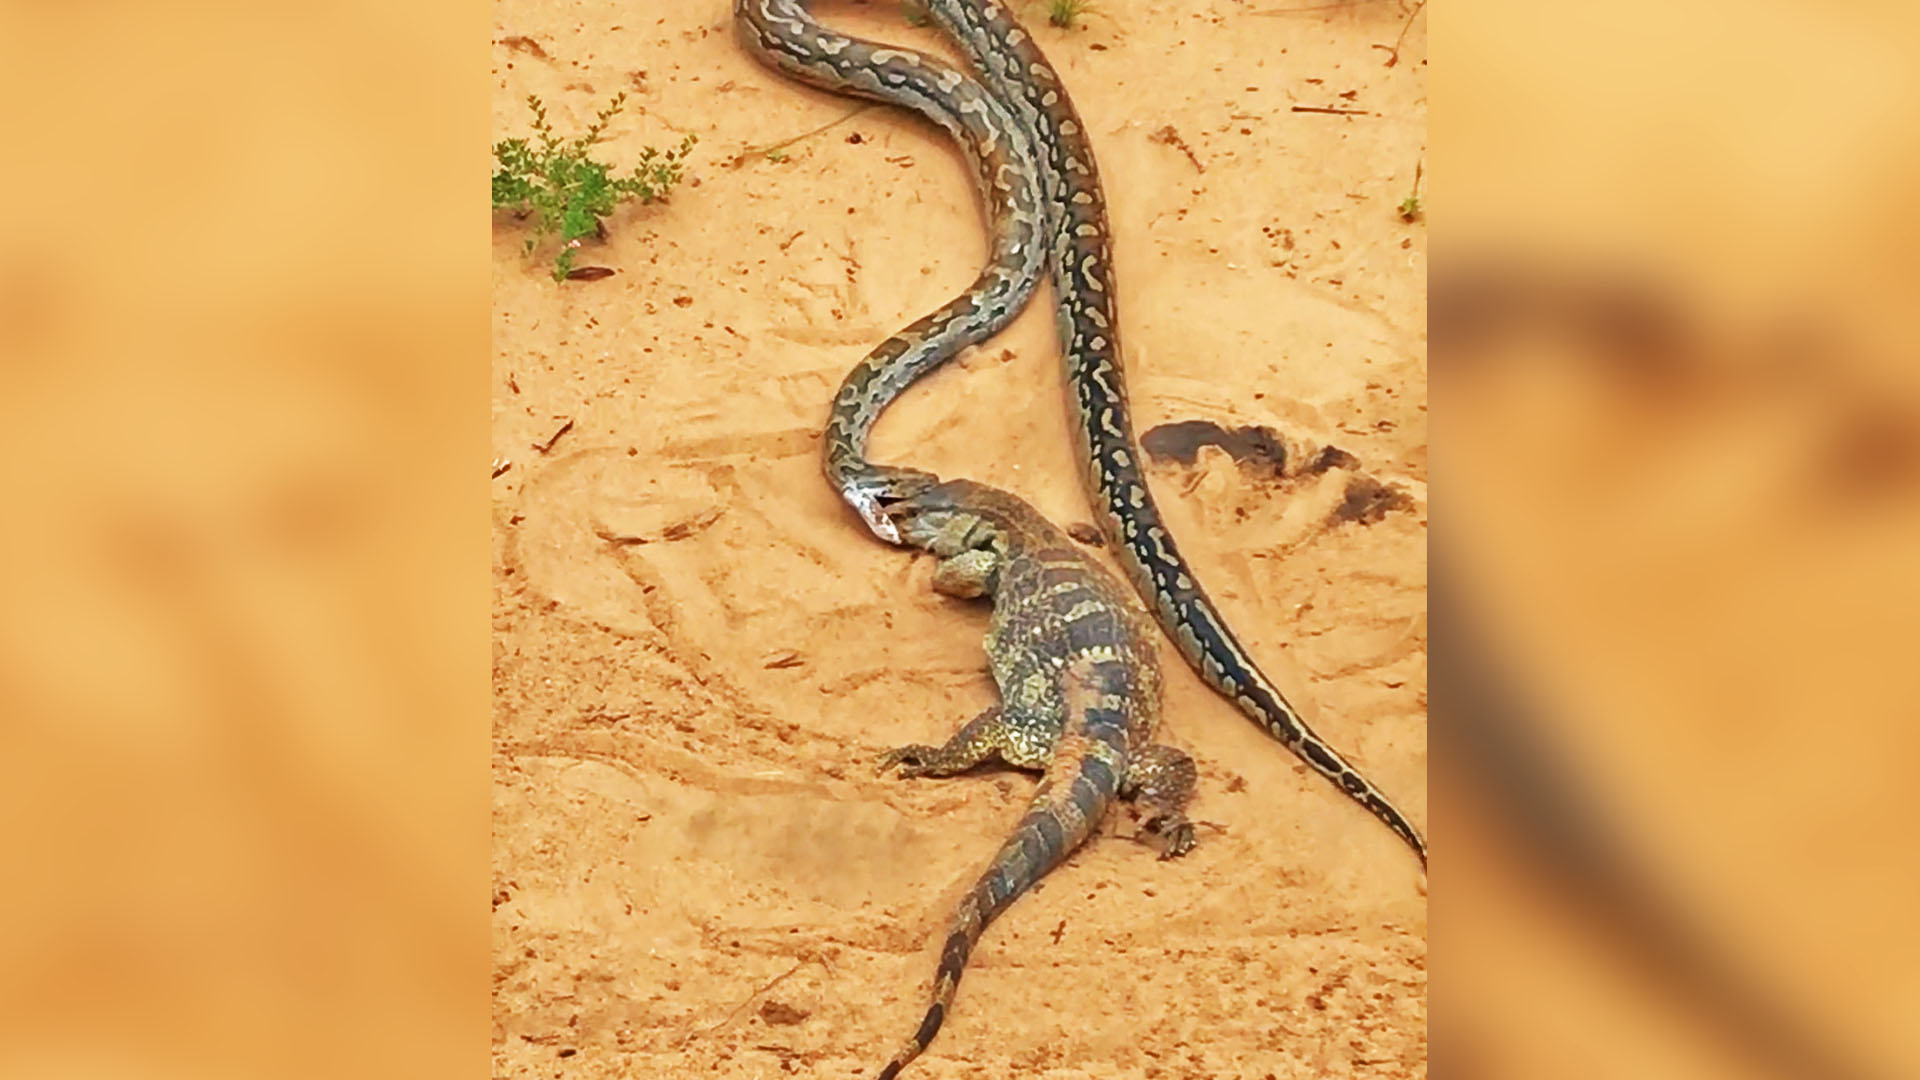 Python Drags Huge Lizard by the Face